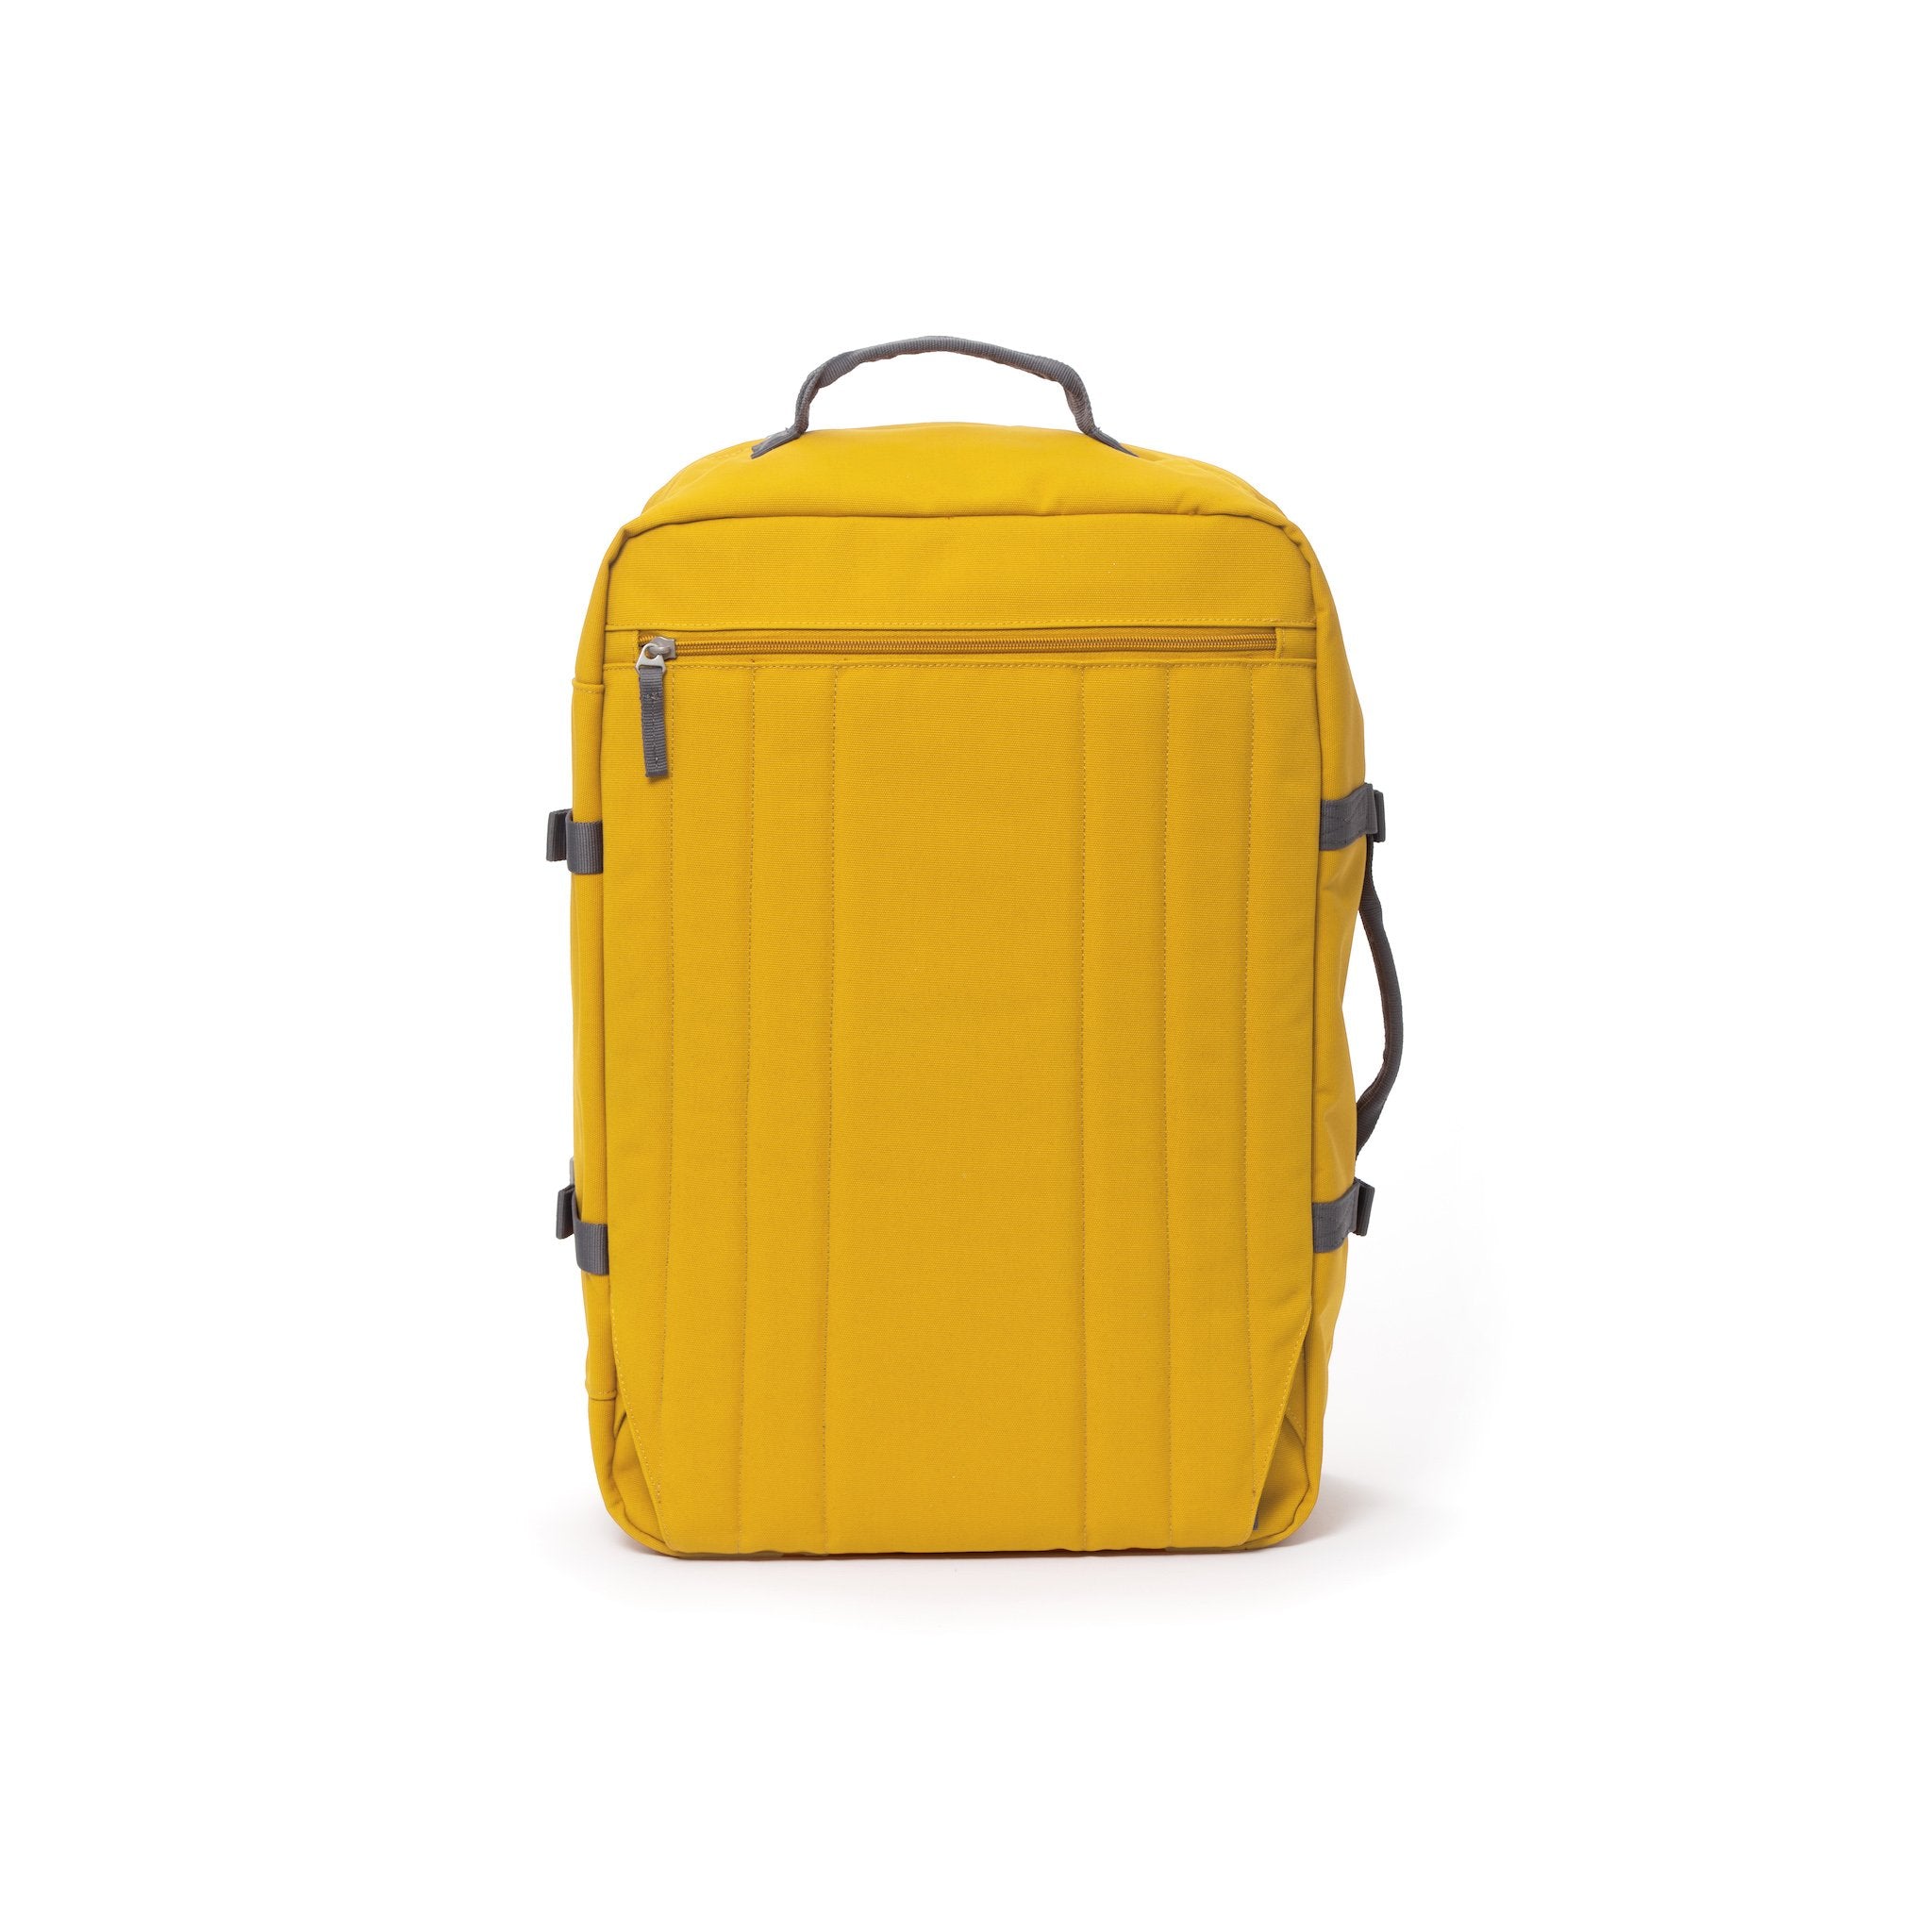 Yellow travel backpack with hidden shoulder straps.